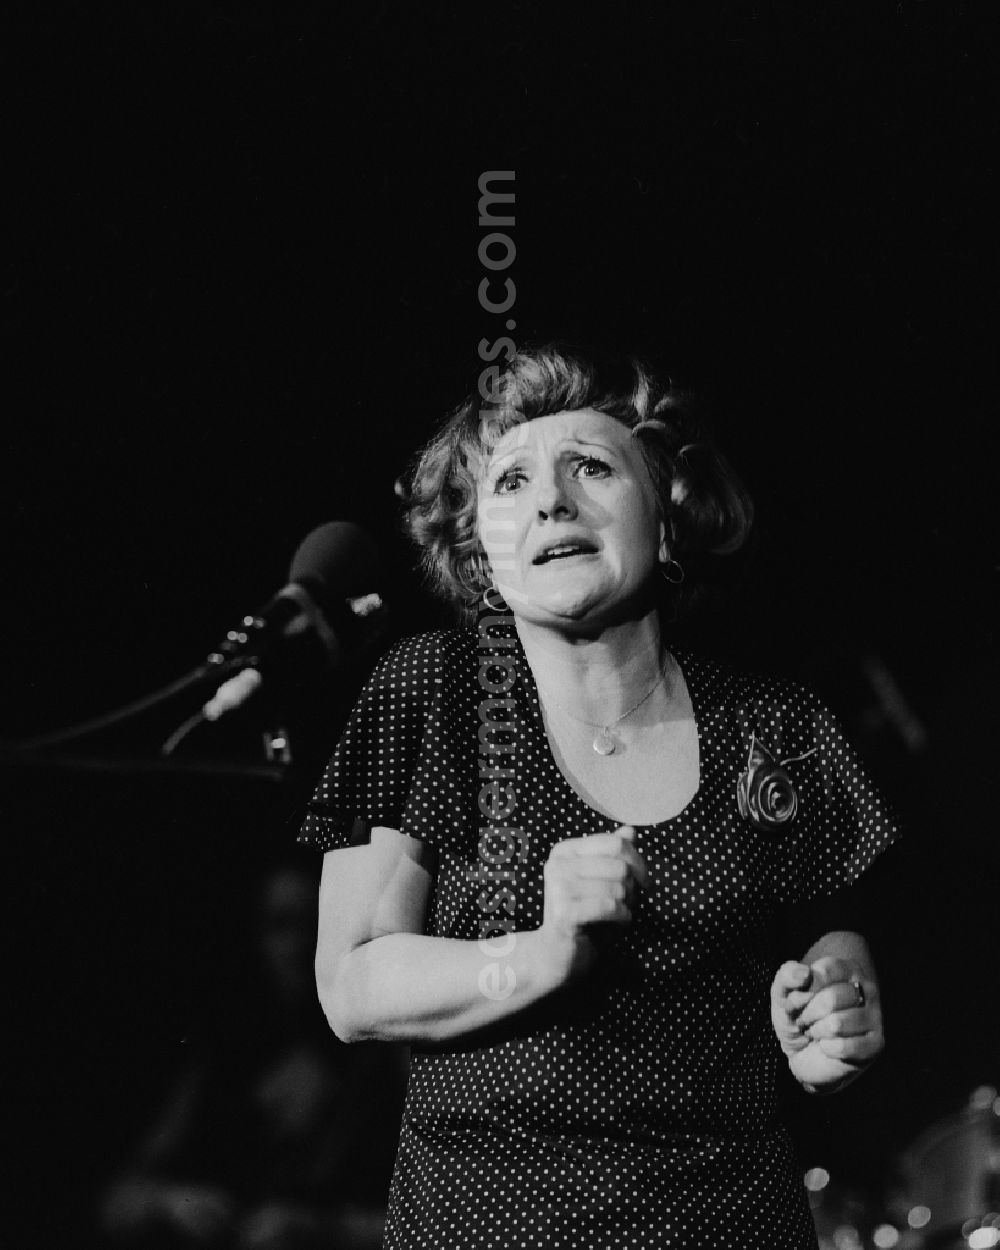 GDR picture archive: Chemnitz - The entertainer, comedienne, singer and actress Helga Hahnemann (1937 - 1991) during a performance at the 3rd Artists Competition in the former Karl-Marx-city today Chemnitz in Saxony today